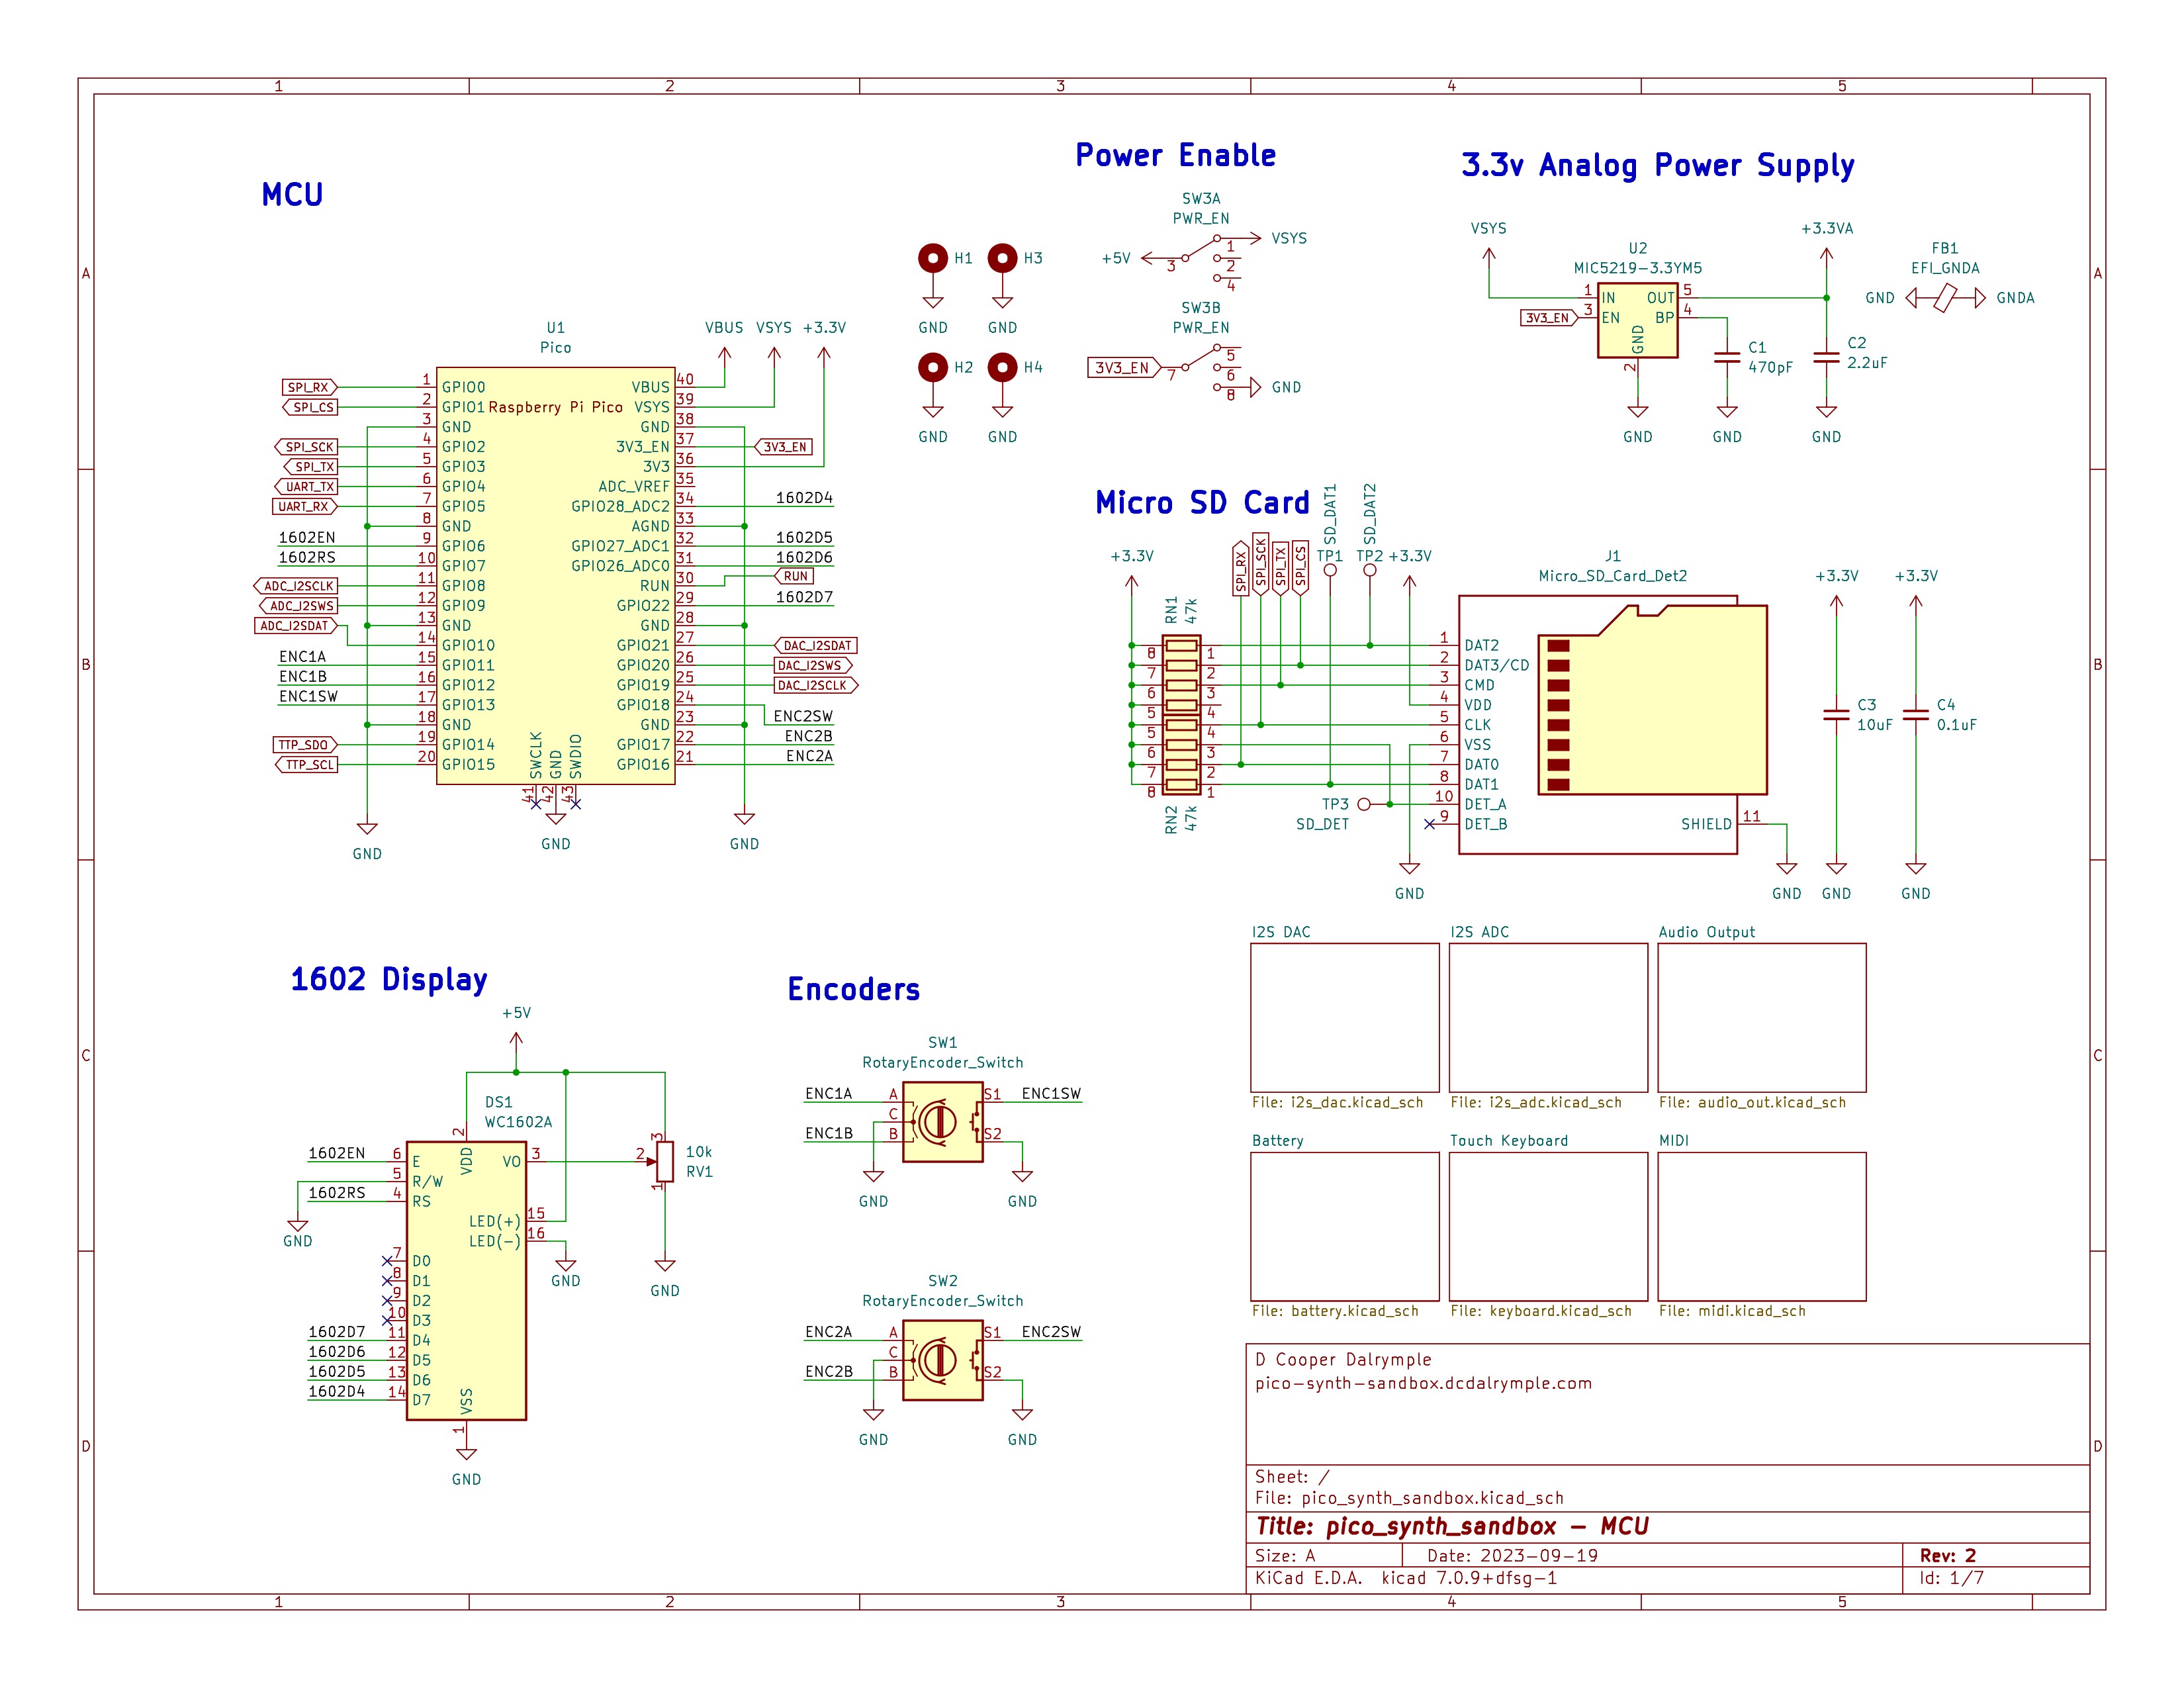 Hardware schematic of pico_synth_sandbox device